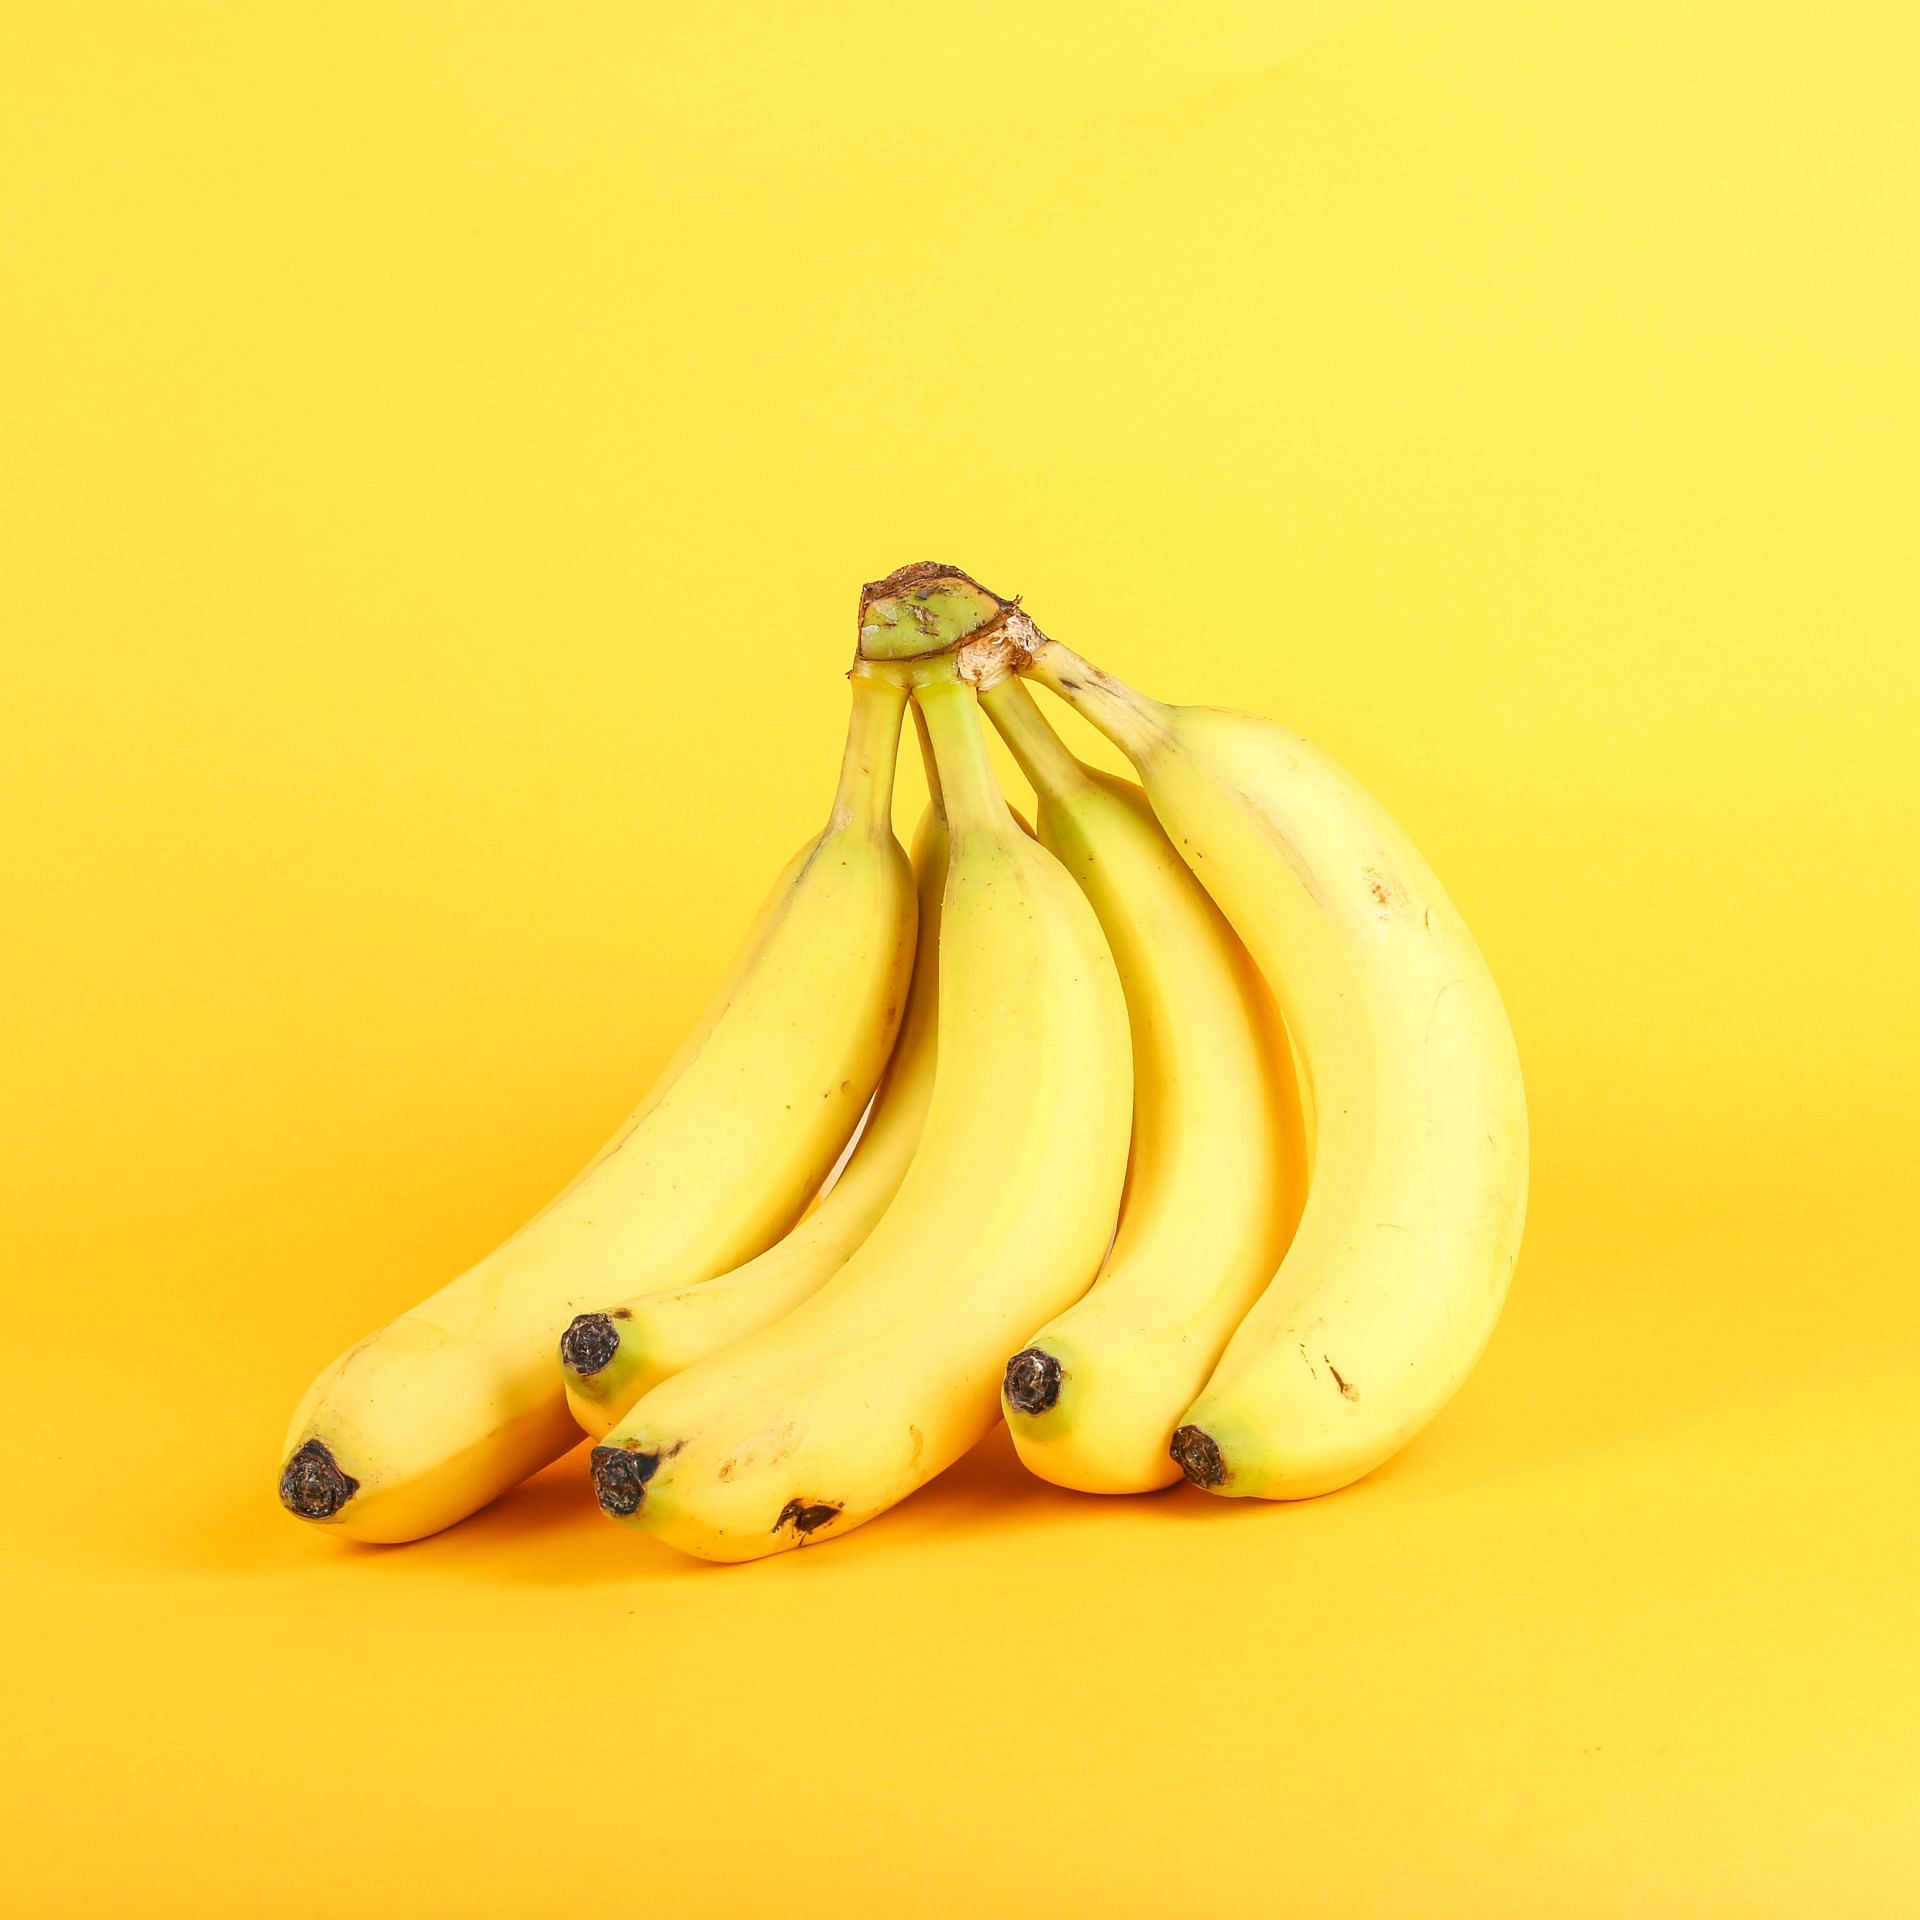 Bananas are a high-carb food and excellent source of potassium.